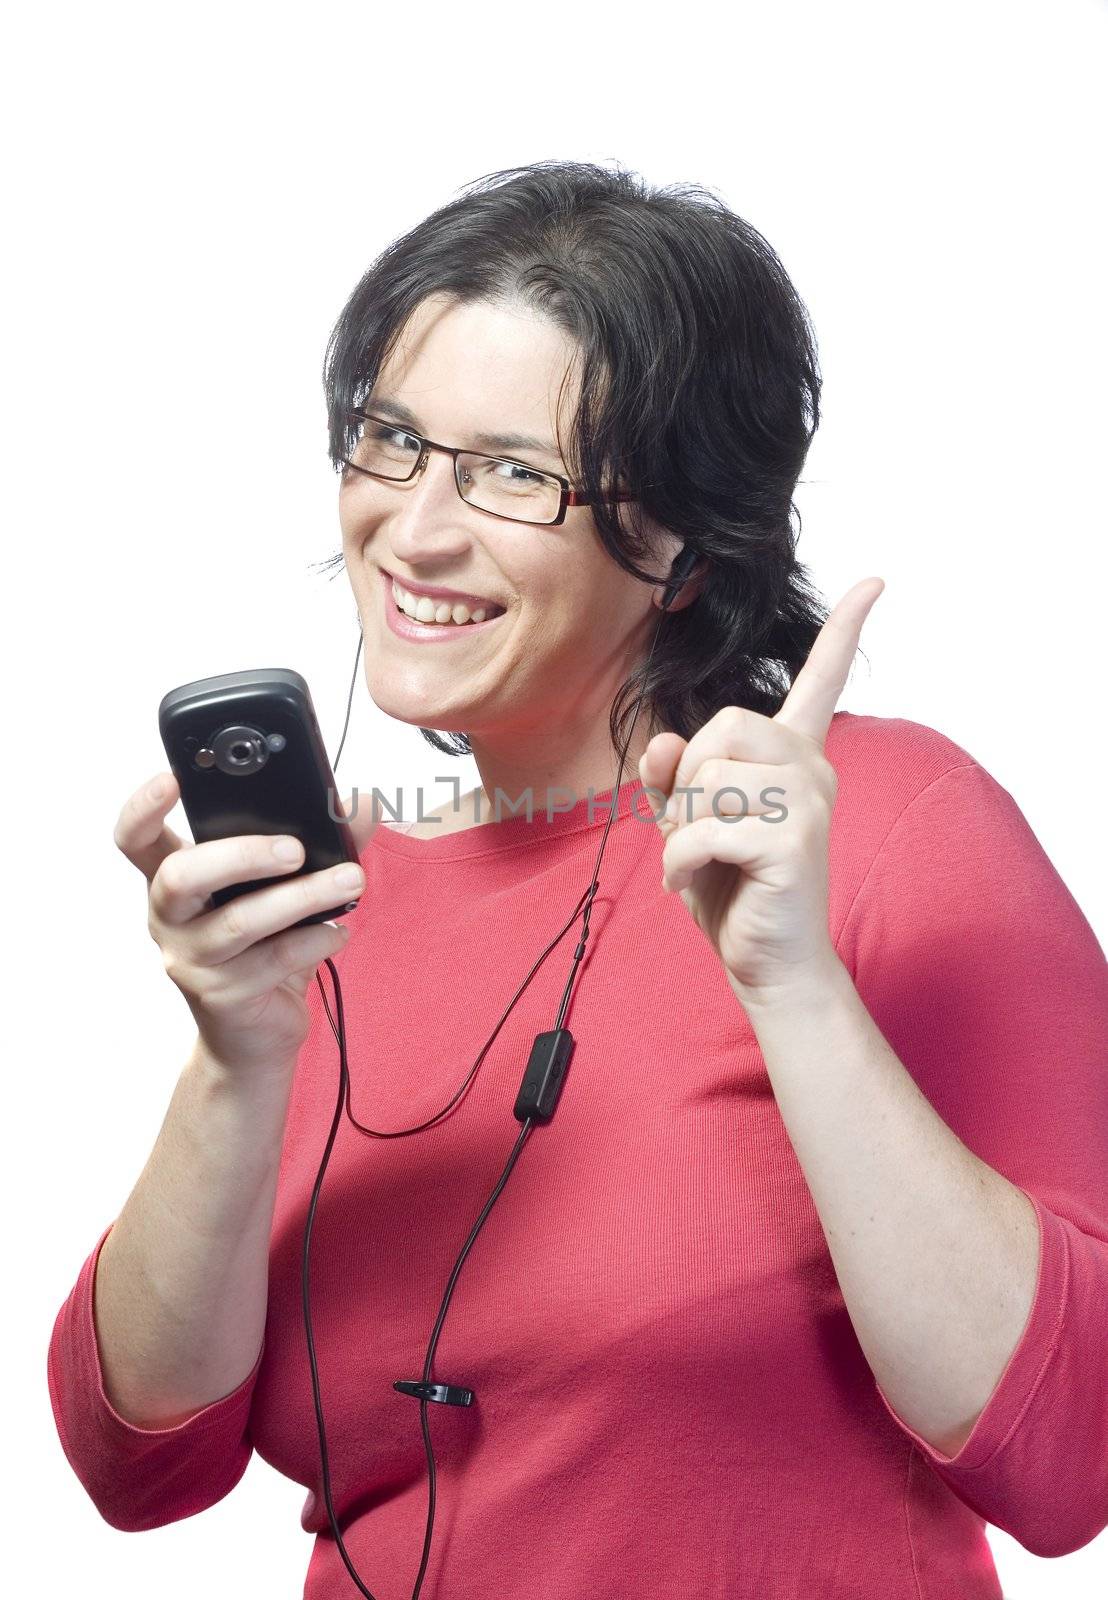 young woman listening, dancing and singing to music in a mp3 device